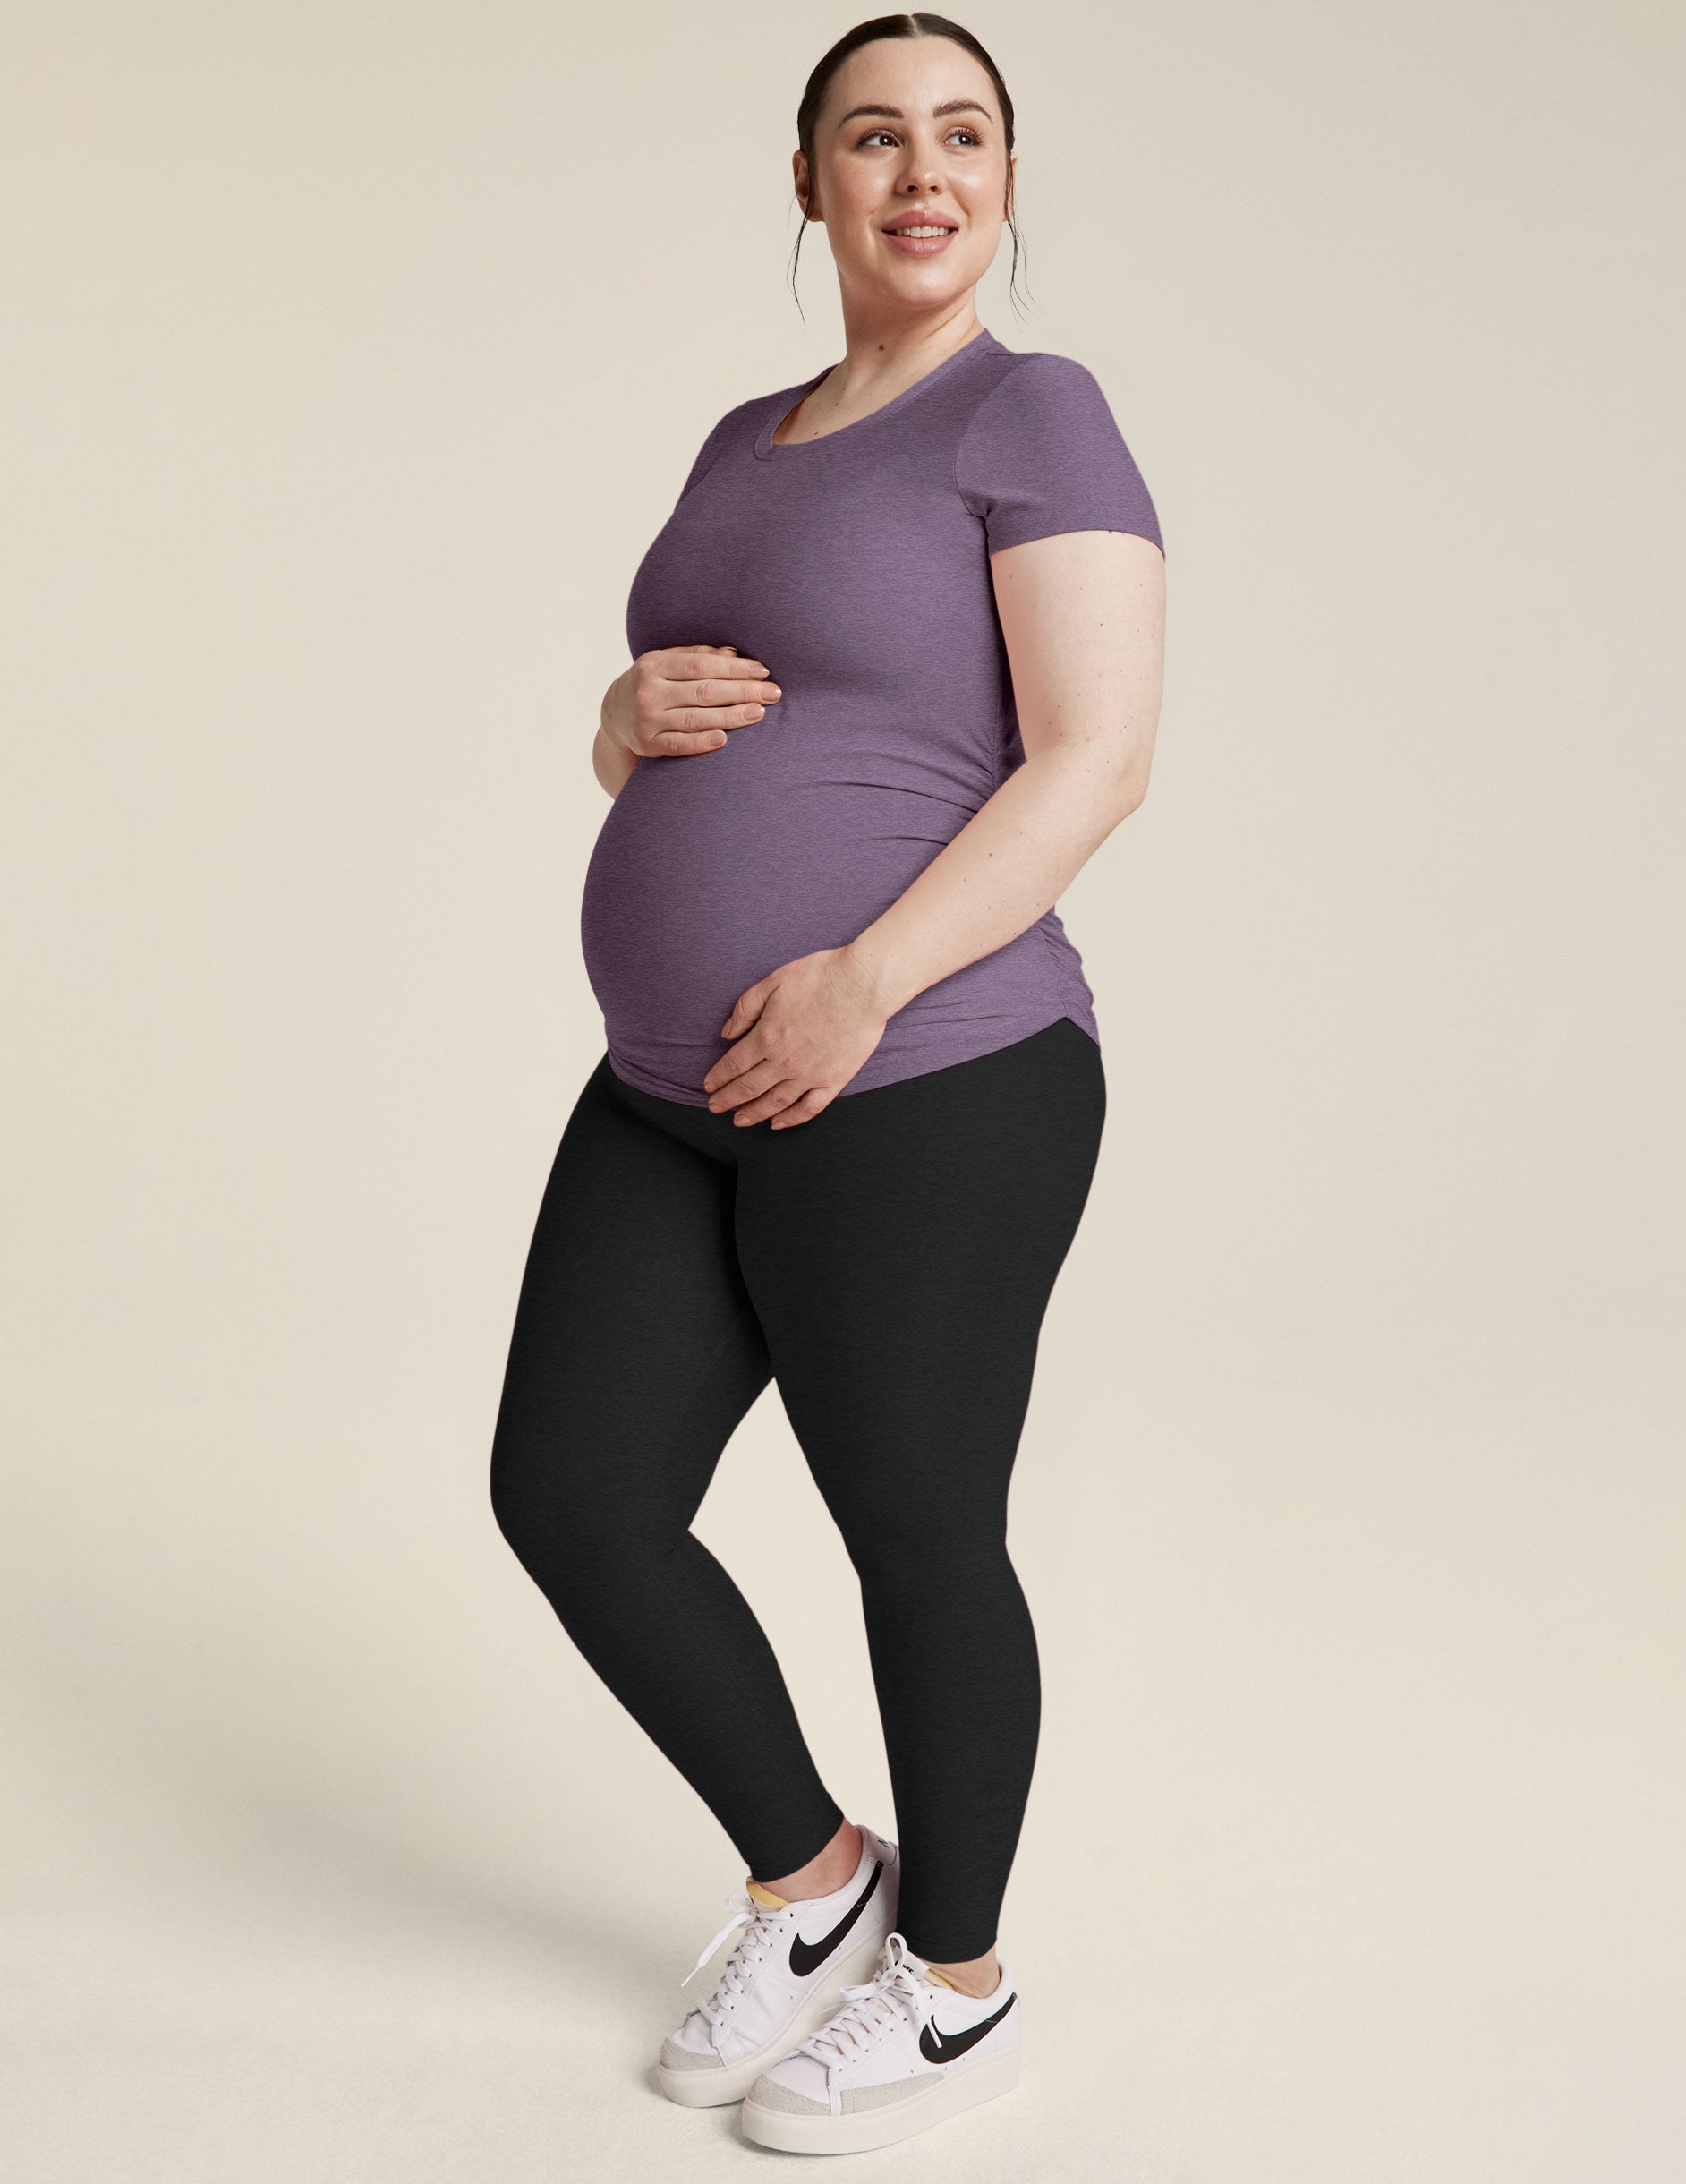 Featherweight One & Only Maternity Tee Image 4